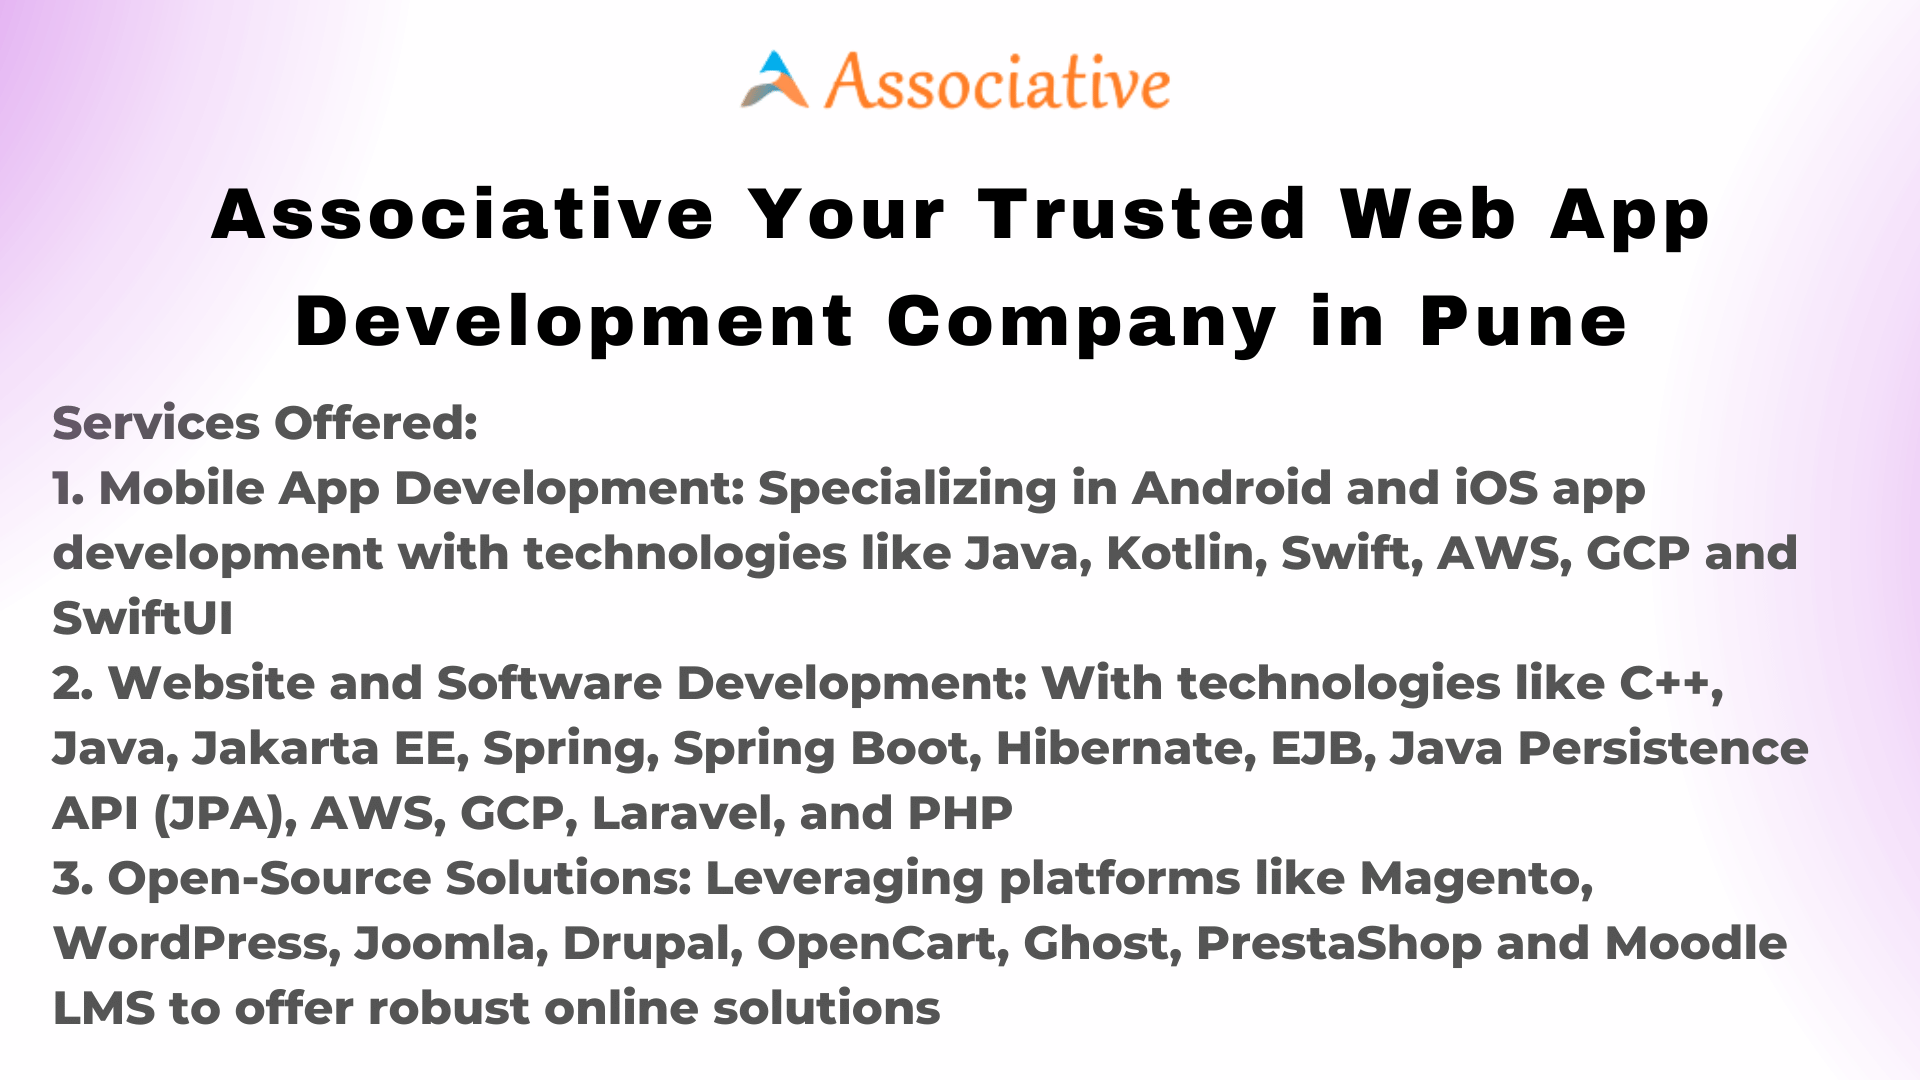 Associative Your Trusted Web App Development Company in Pune